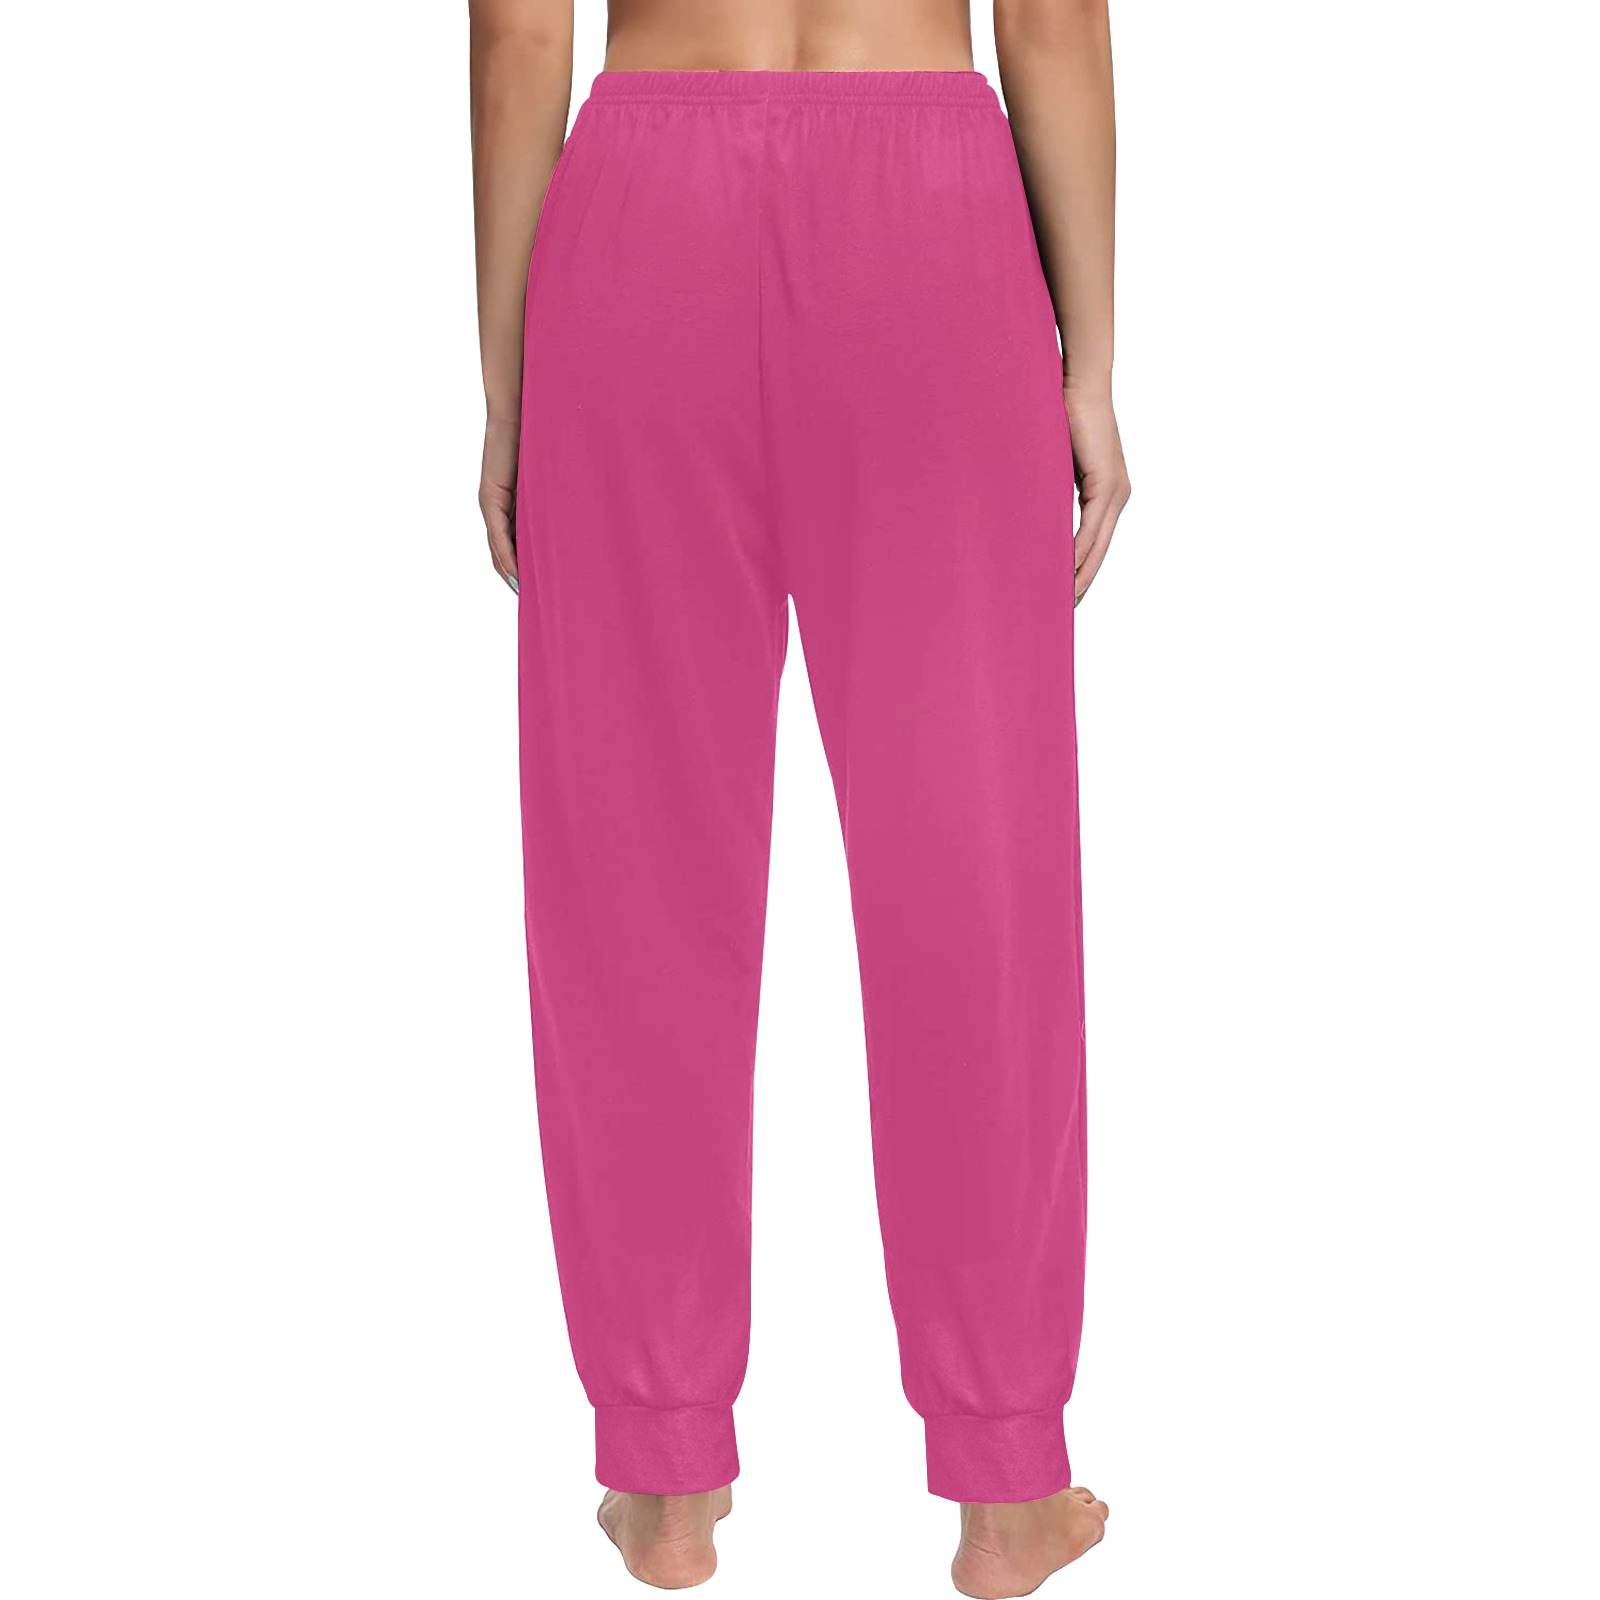 Pants pink with single logo Women's All Over Print Pajama Trousers